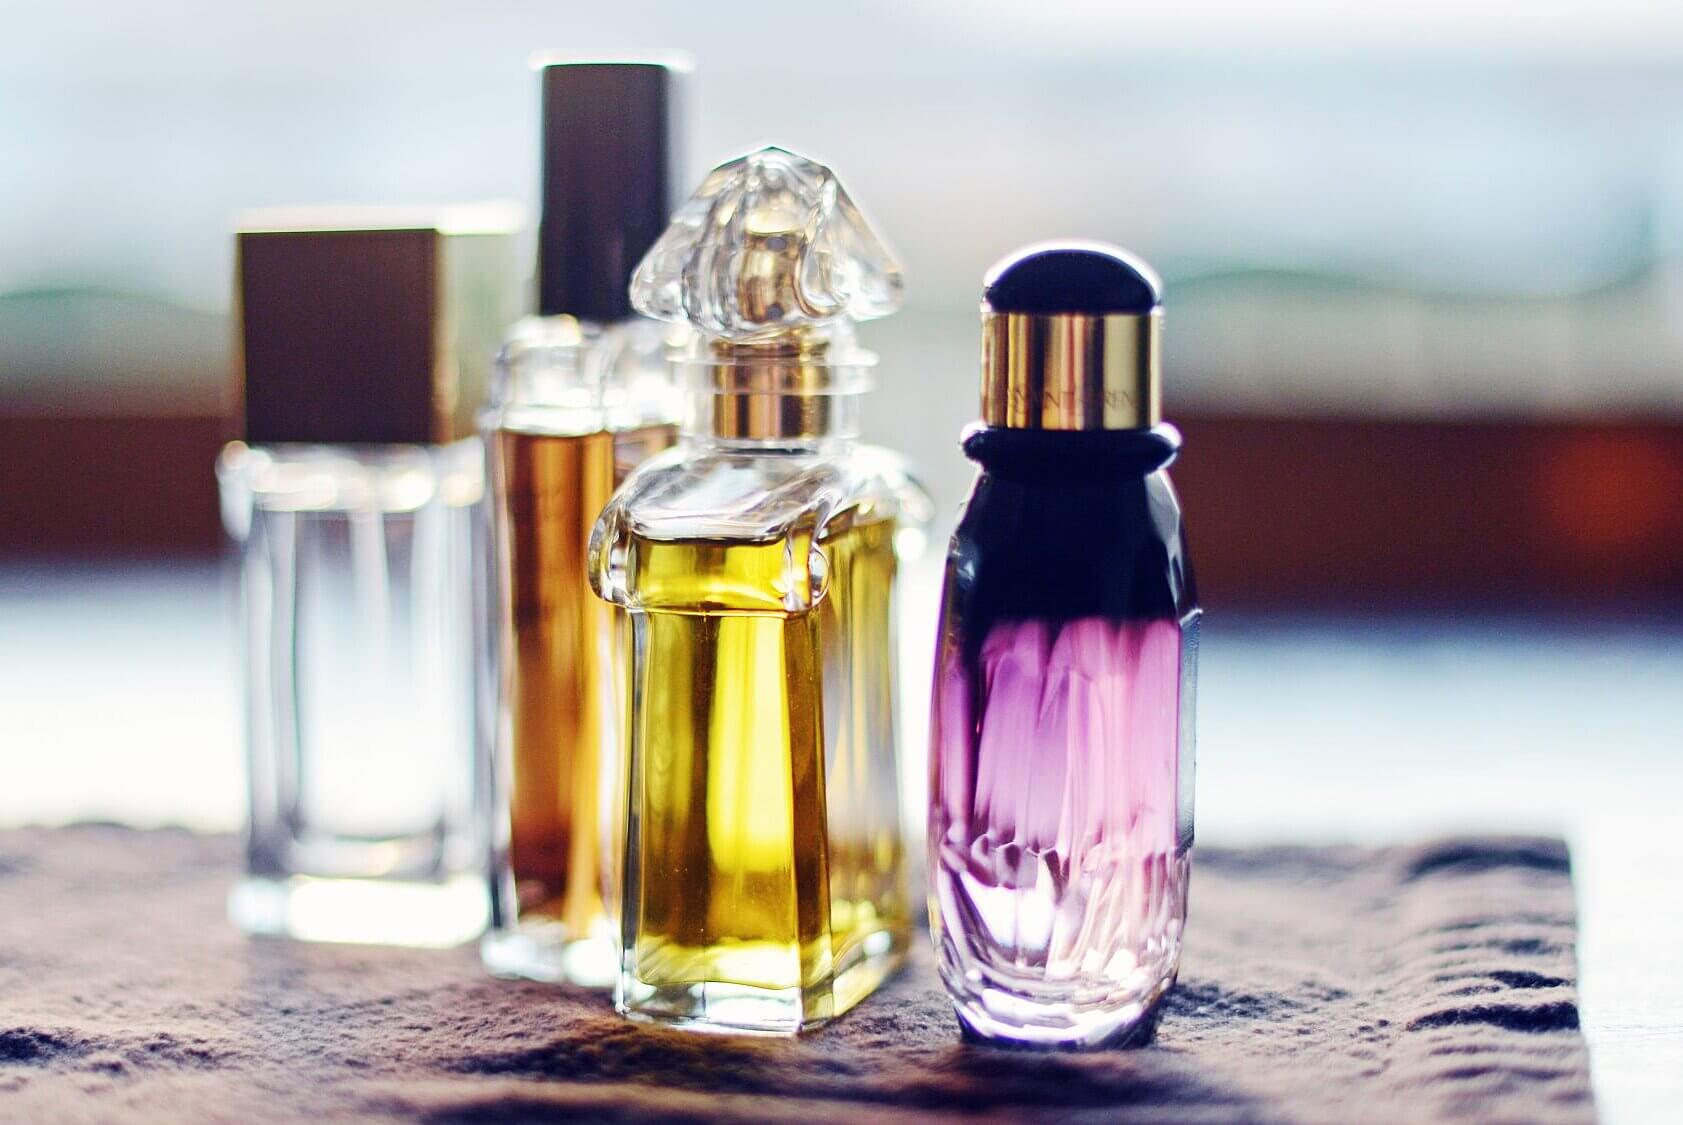 WAYS TO IMPROVE YOUR PERFUME COLLECTION.